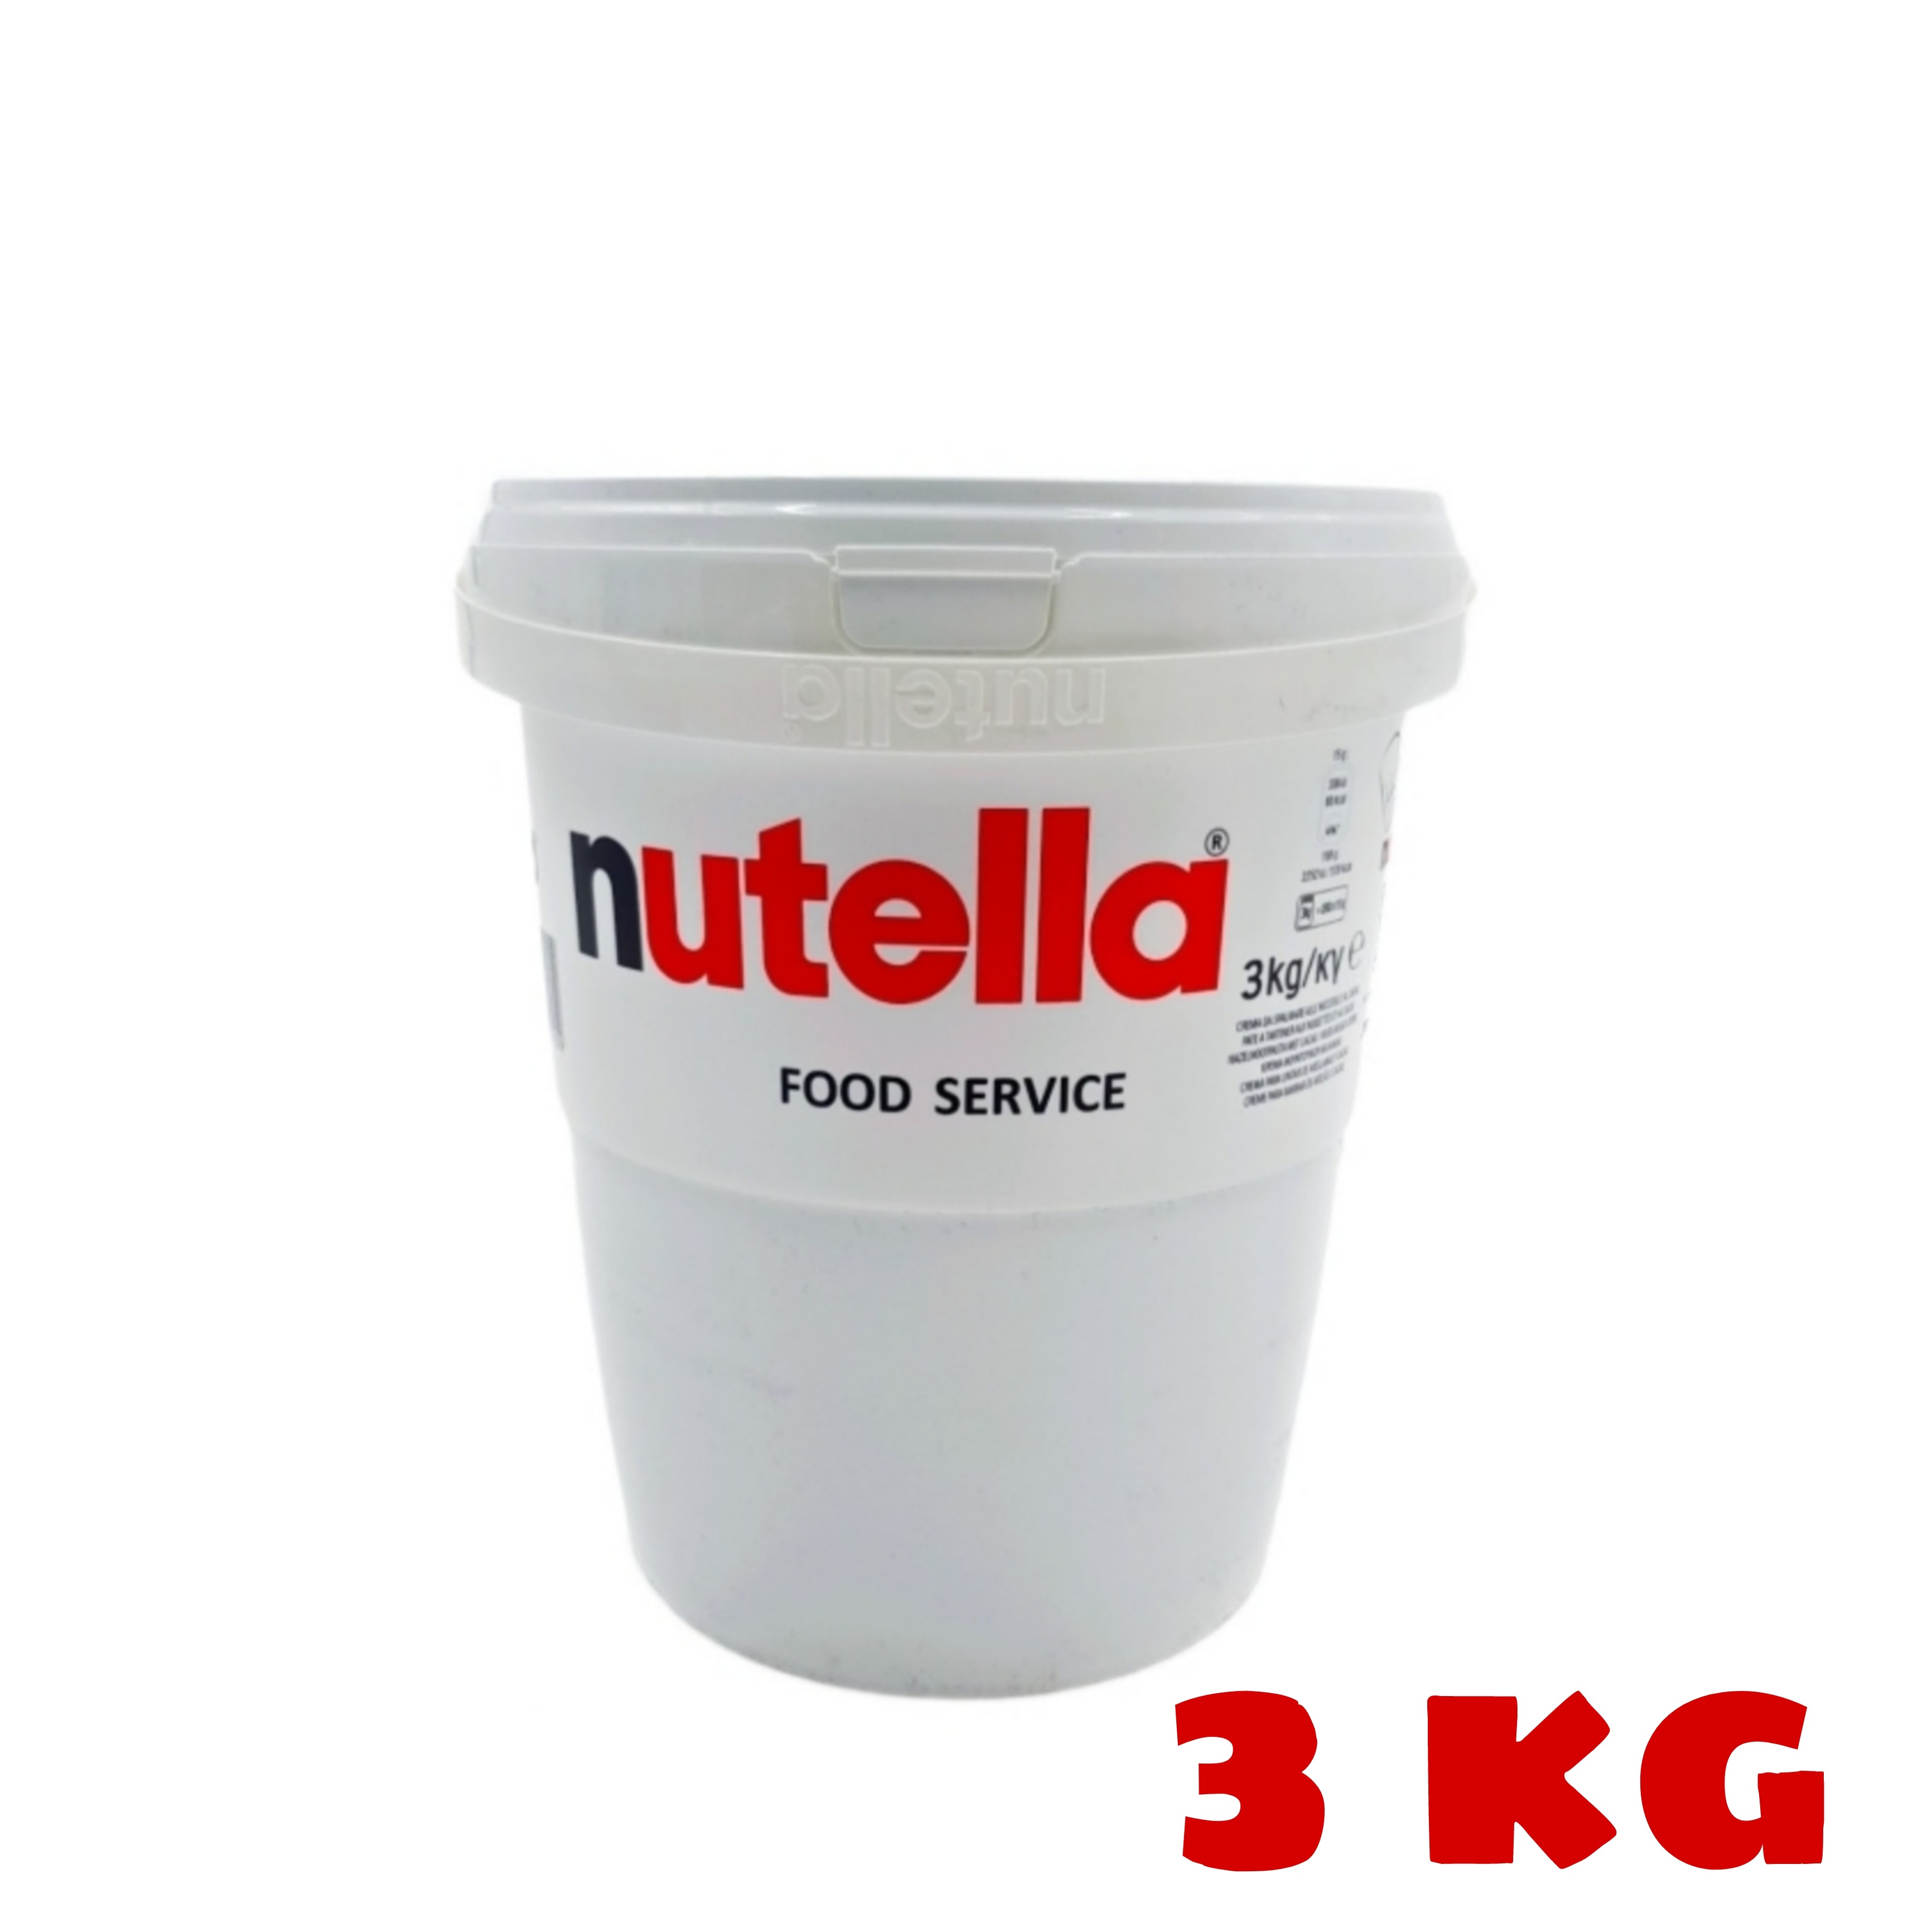 (Food) Nutella Food Service Catering Tub (3kg)